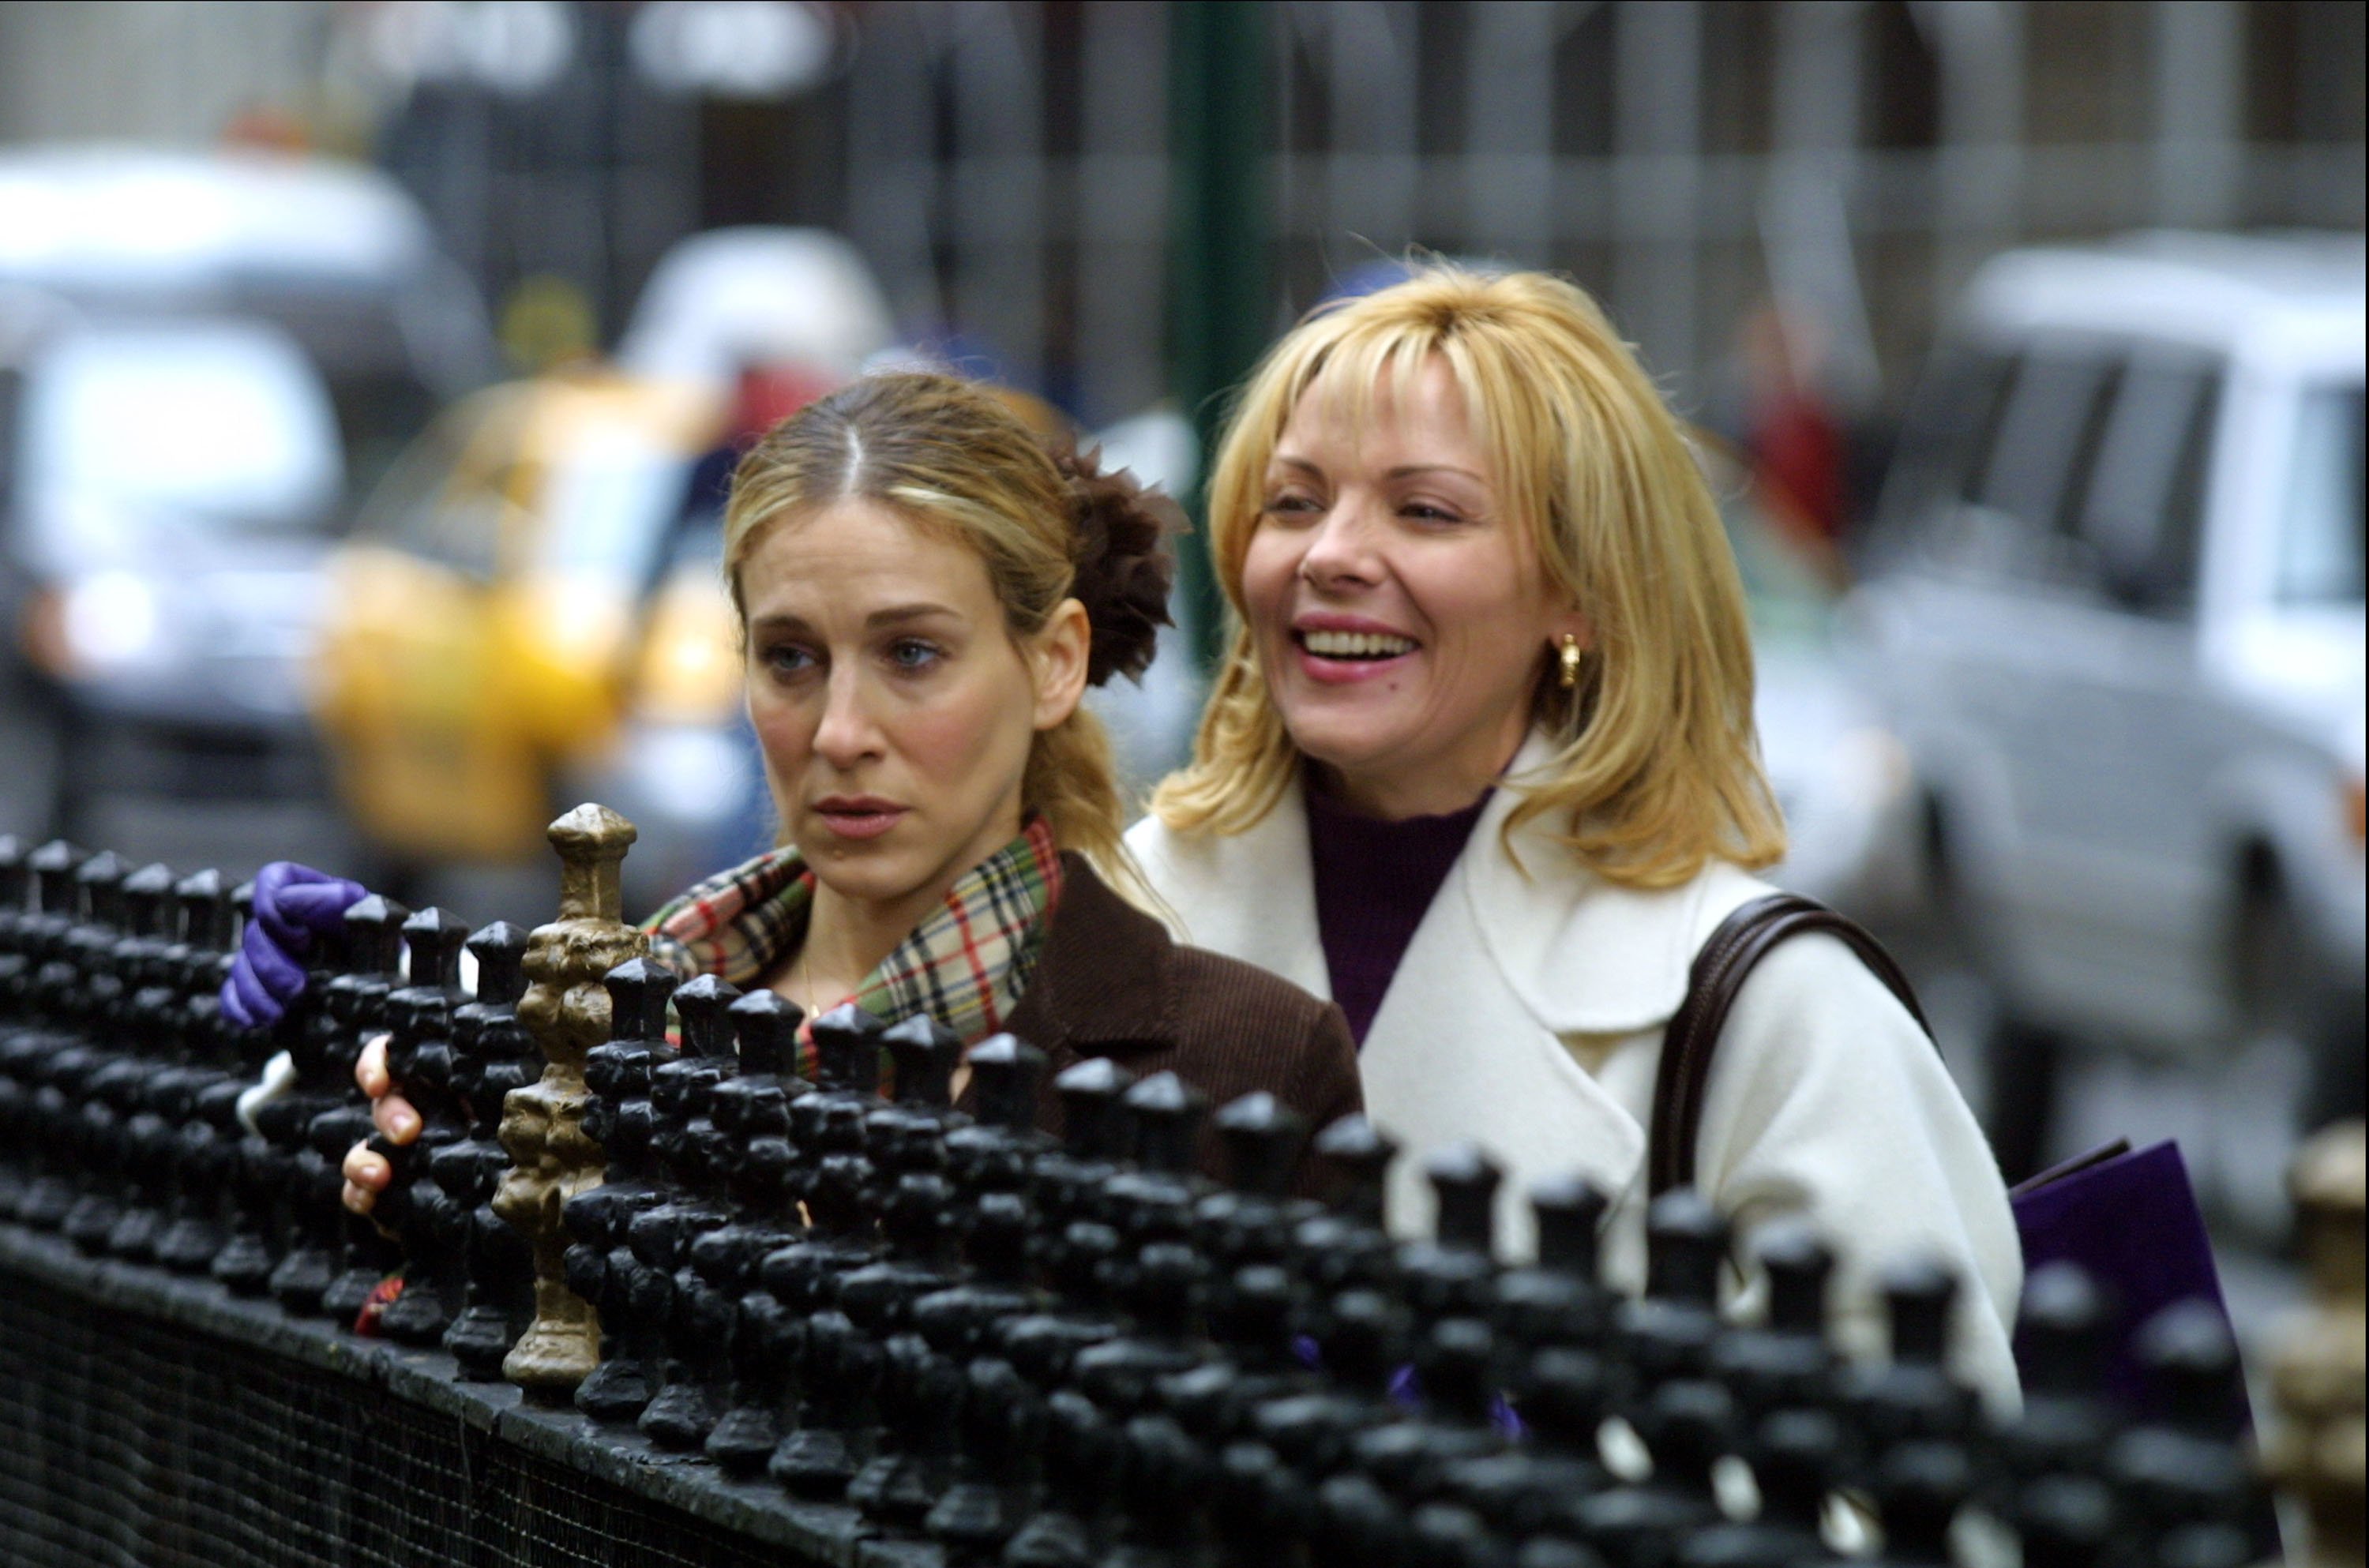 Sarah Jessica Parker and Kim Cattrall film a scene for 'Sex and the City' in 2001